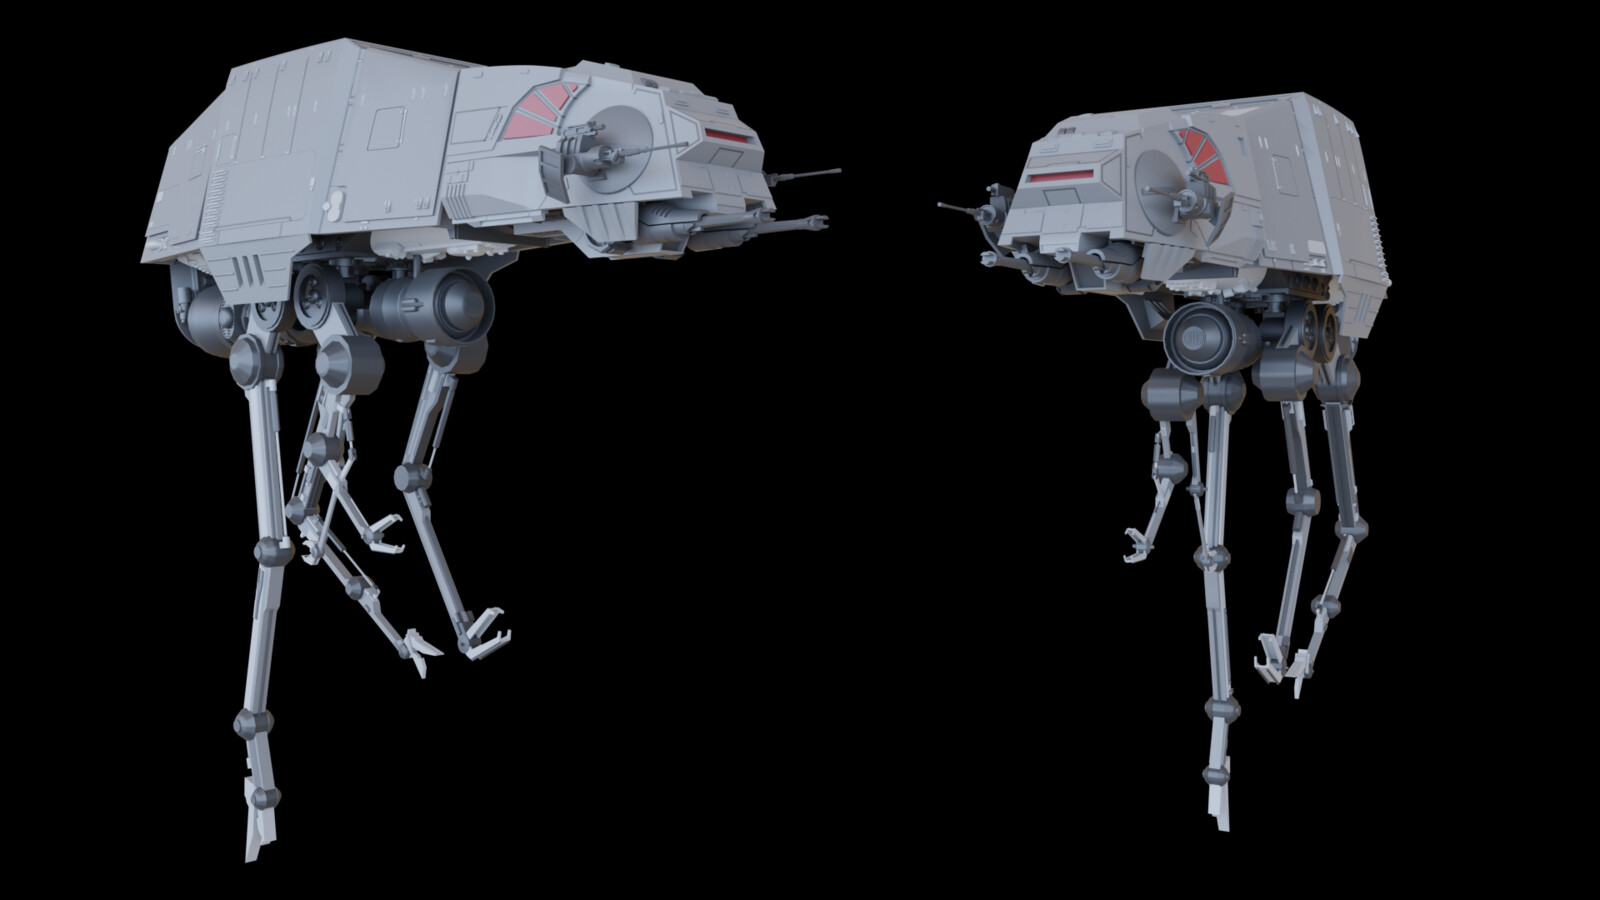 Doug Chiang requested a model of a ATAT/Droid concept design he had in mind for the ocean planets backround.  Sadly, it was cut from the show.